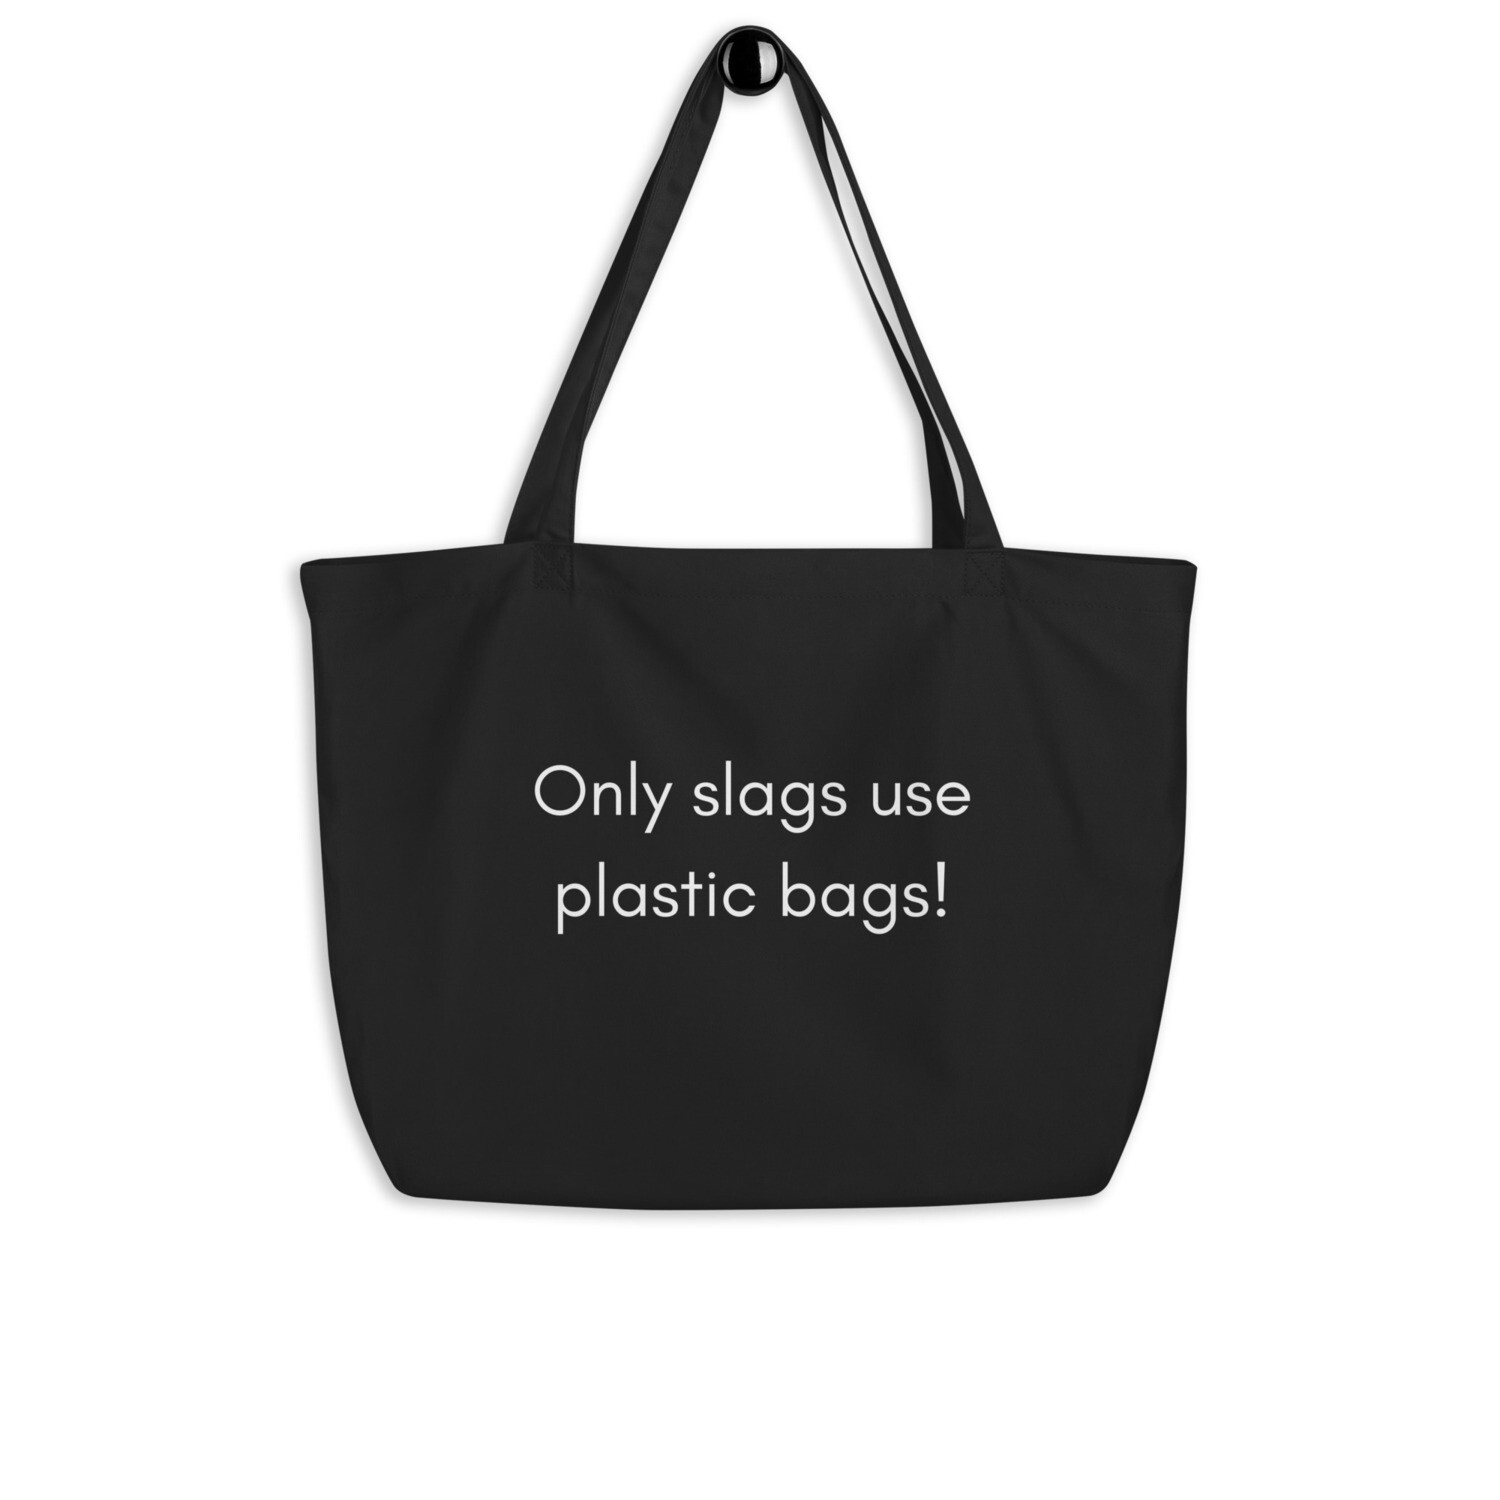 Only slags use plastic bags! tote.